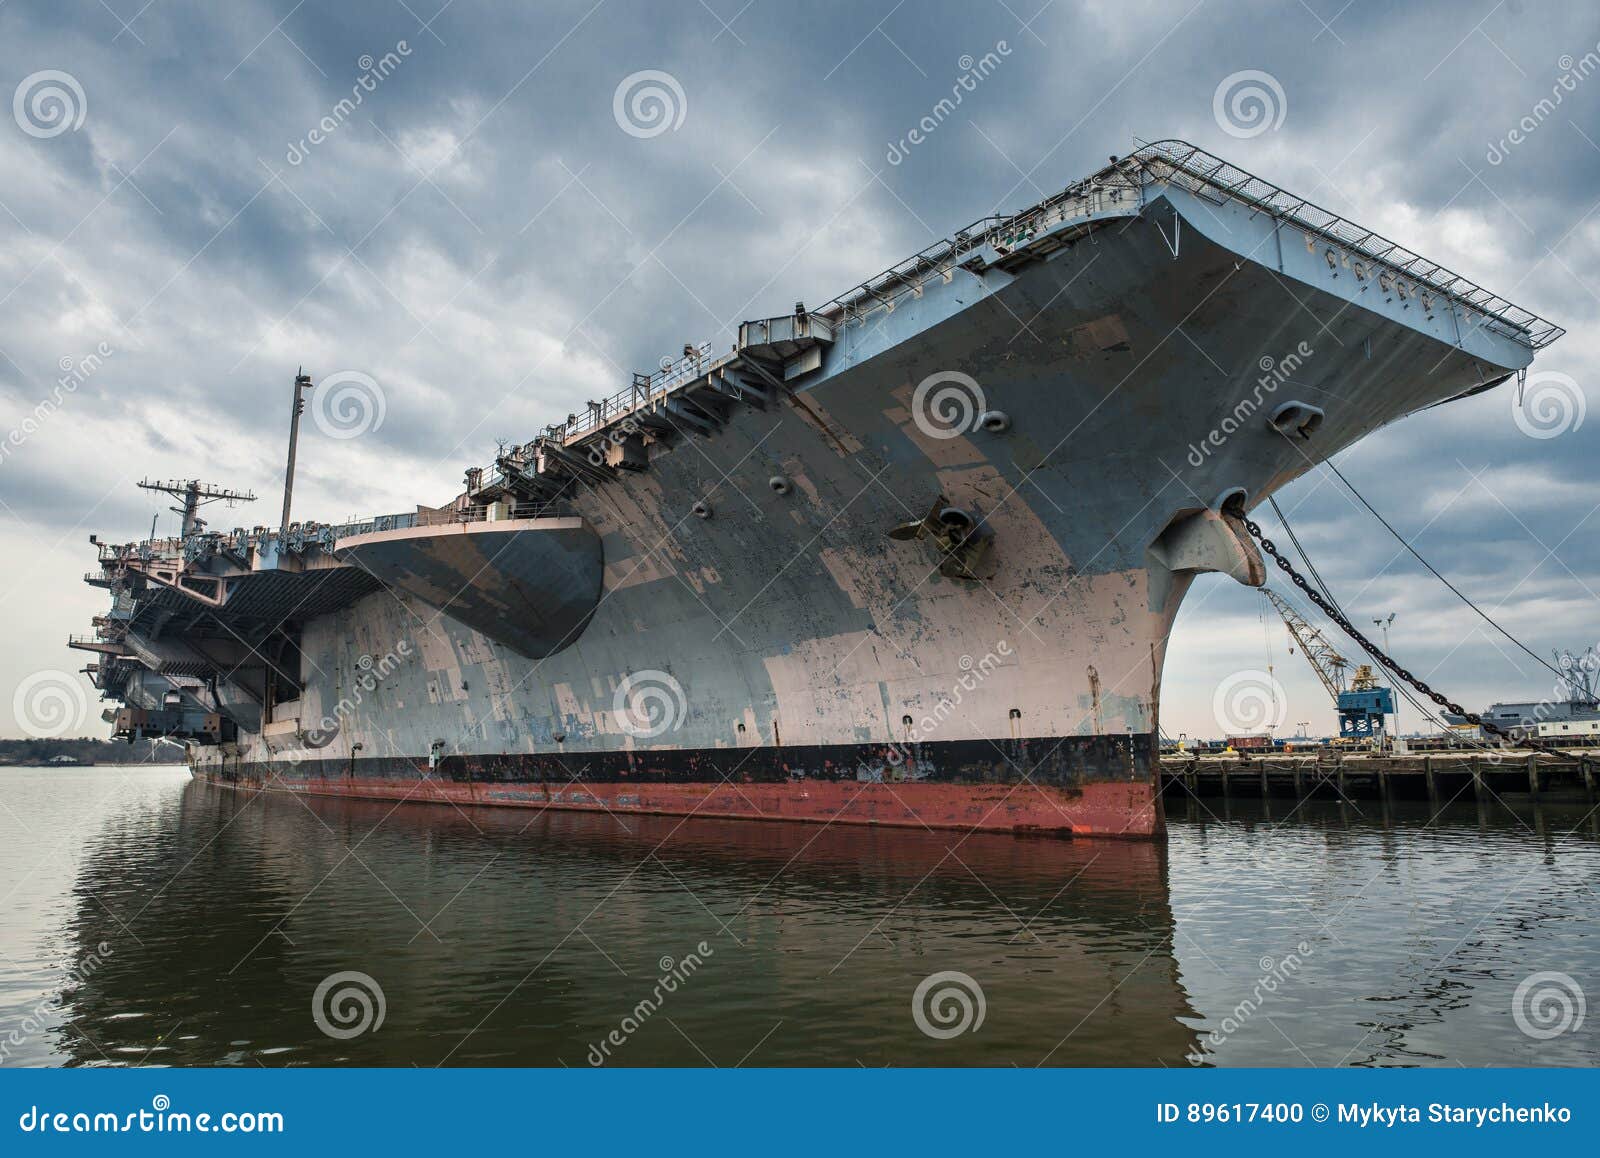 us navi aircraft carrier warship in the port